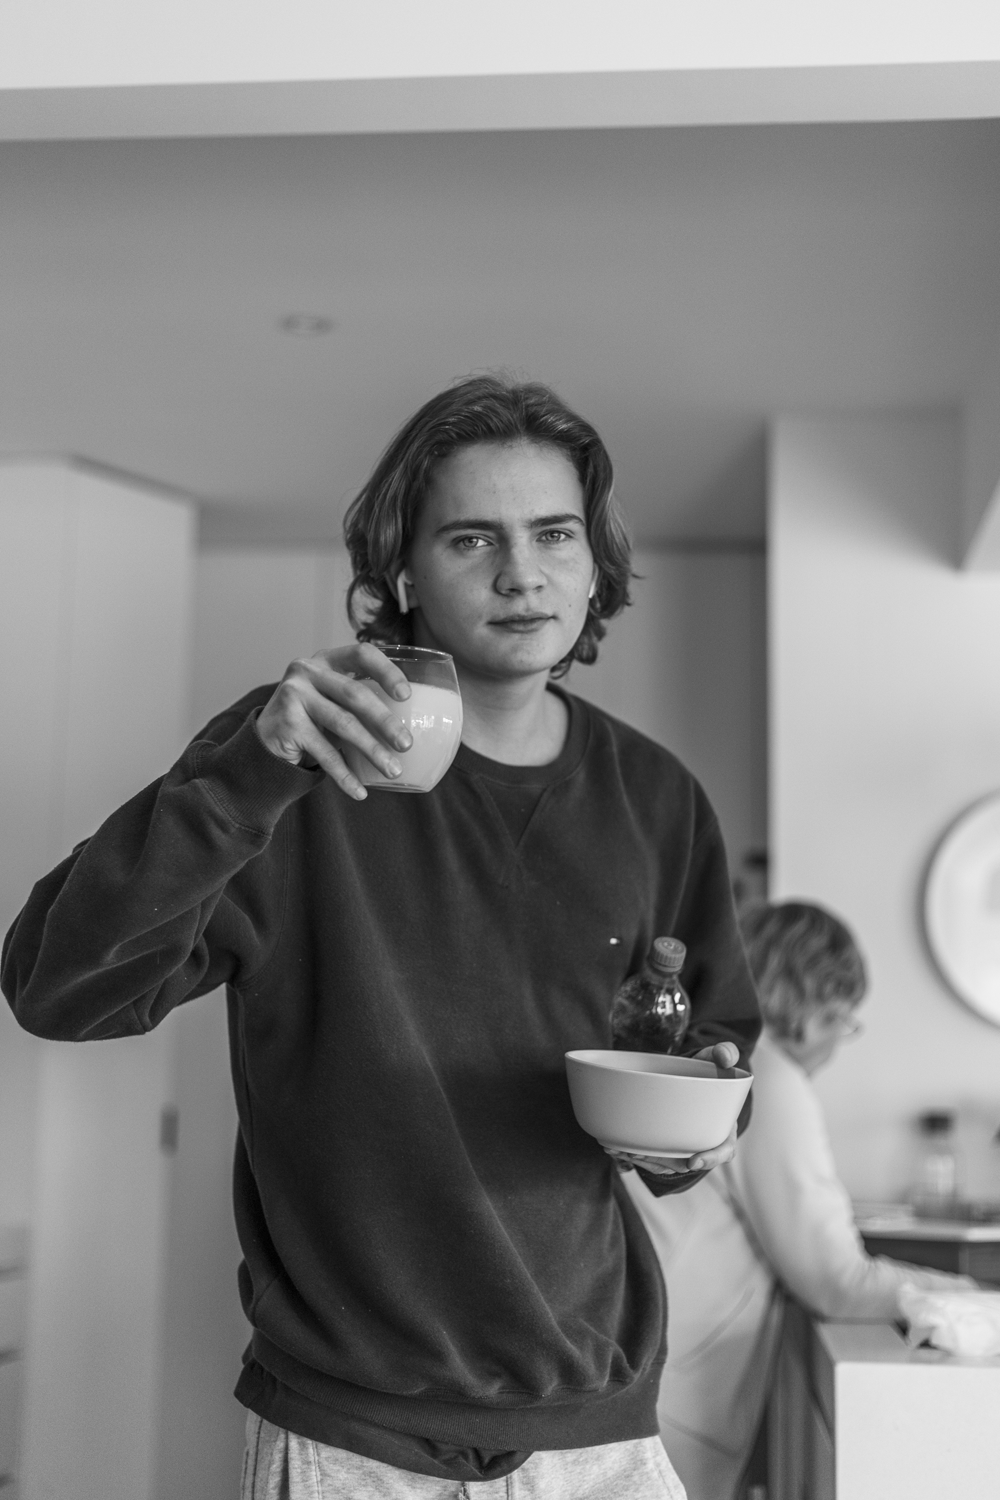 Black and white photograph of a teenage boy holding a glass and a bowl in a domestic kitchen environment. 